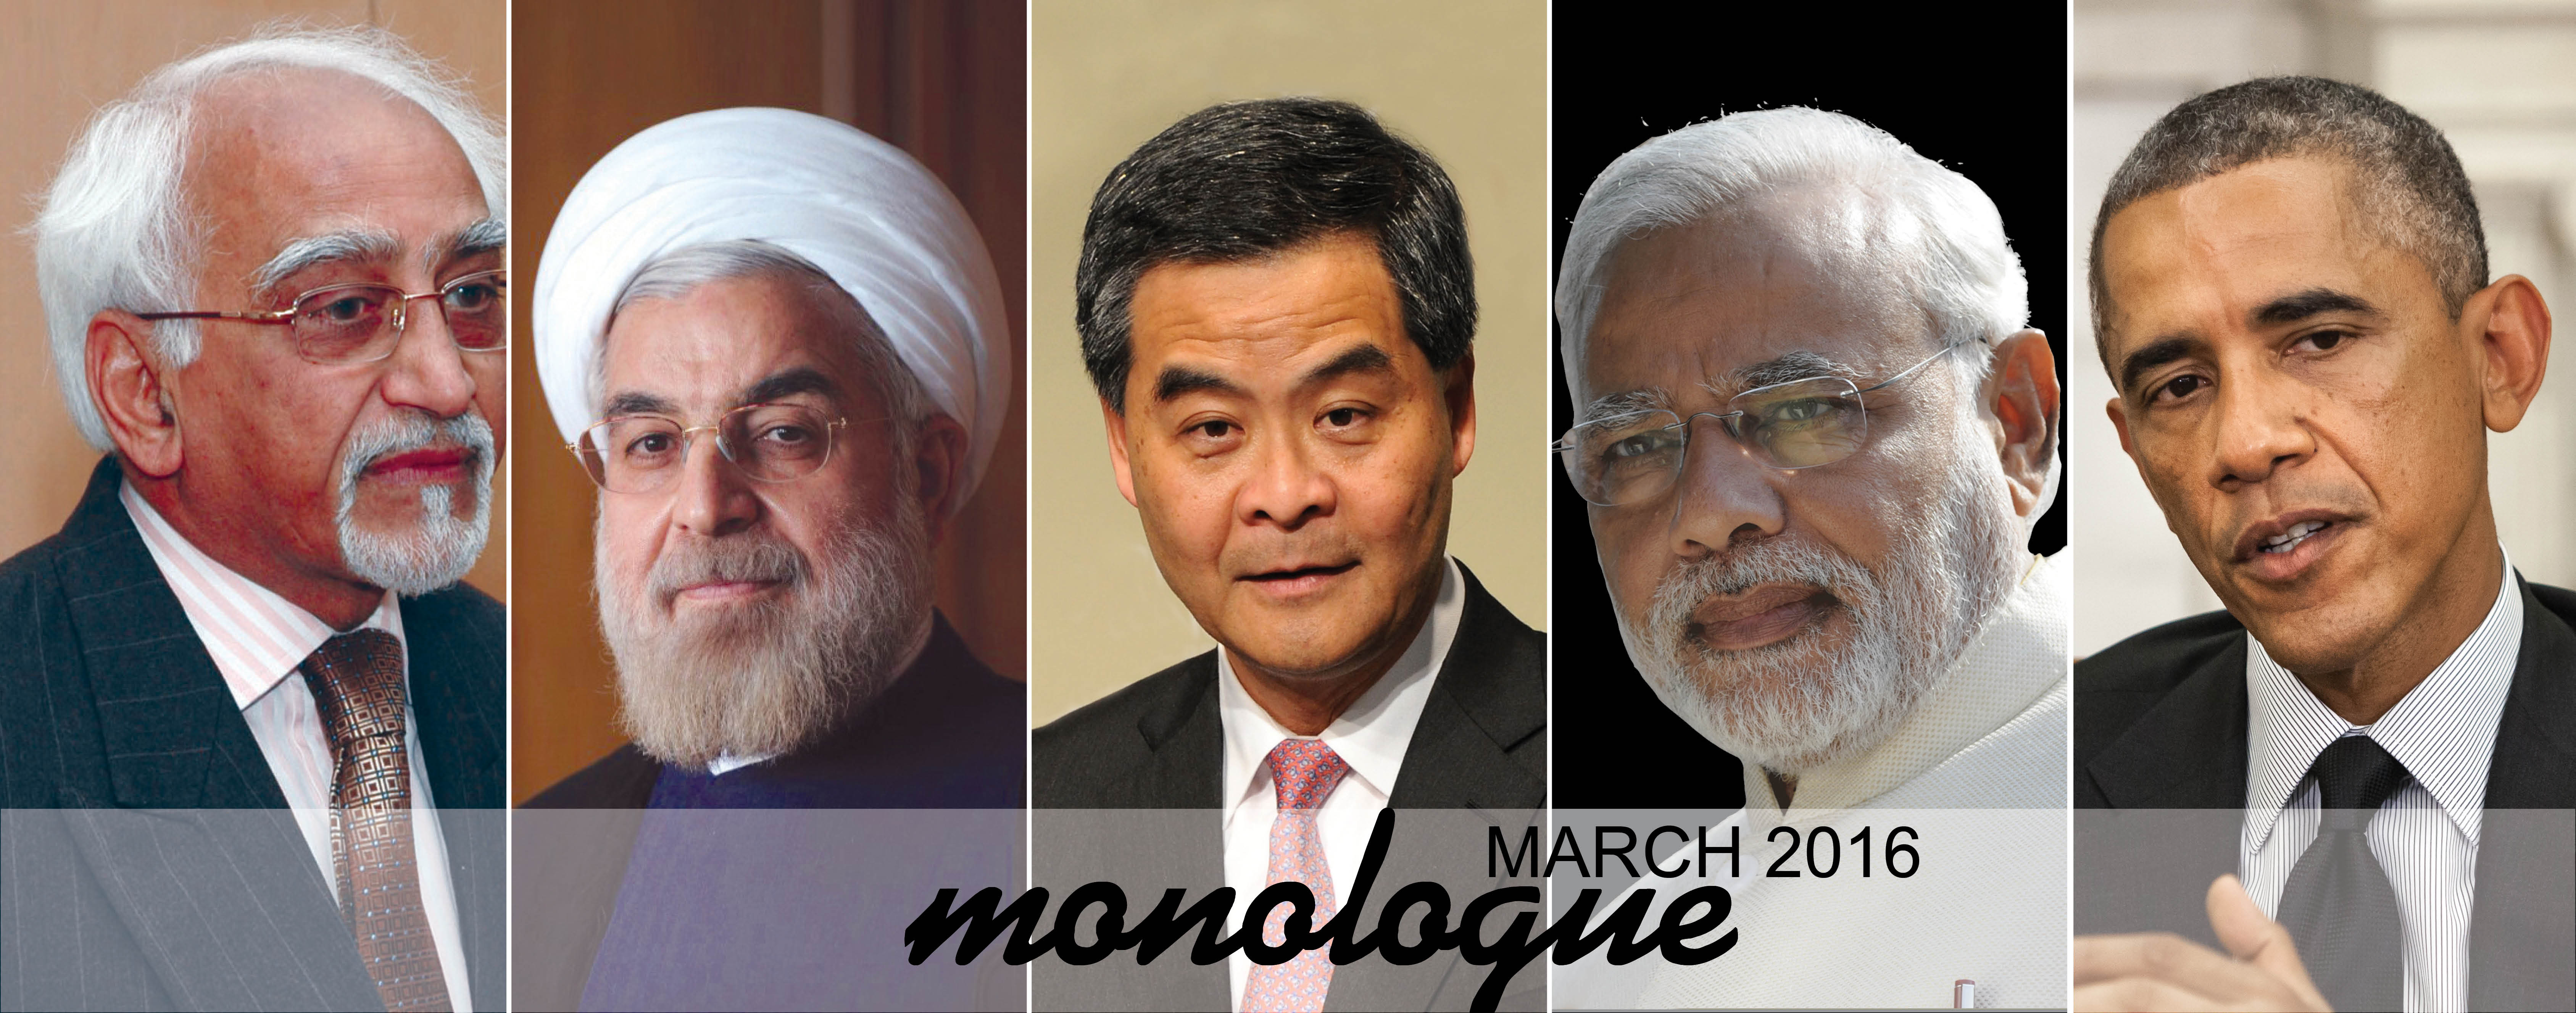 Monologue - People Speak – March 2015 March 2018 issue